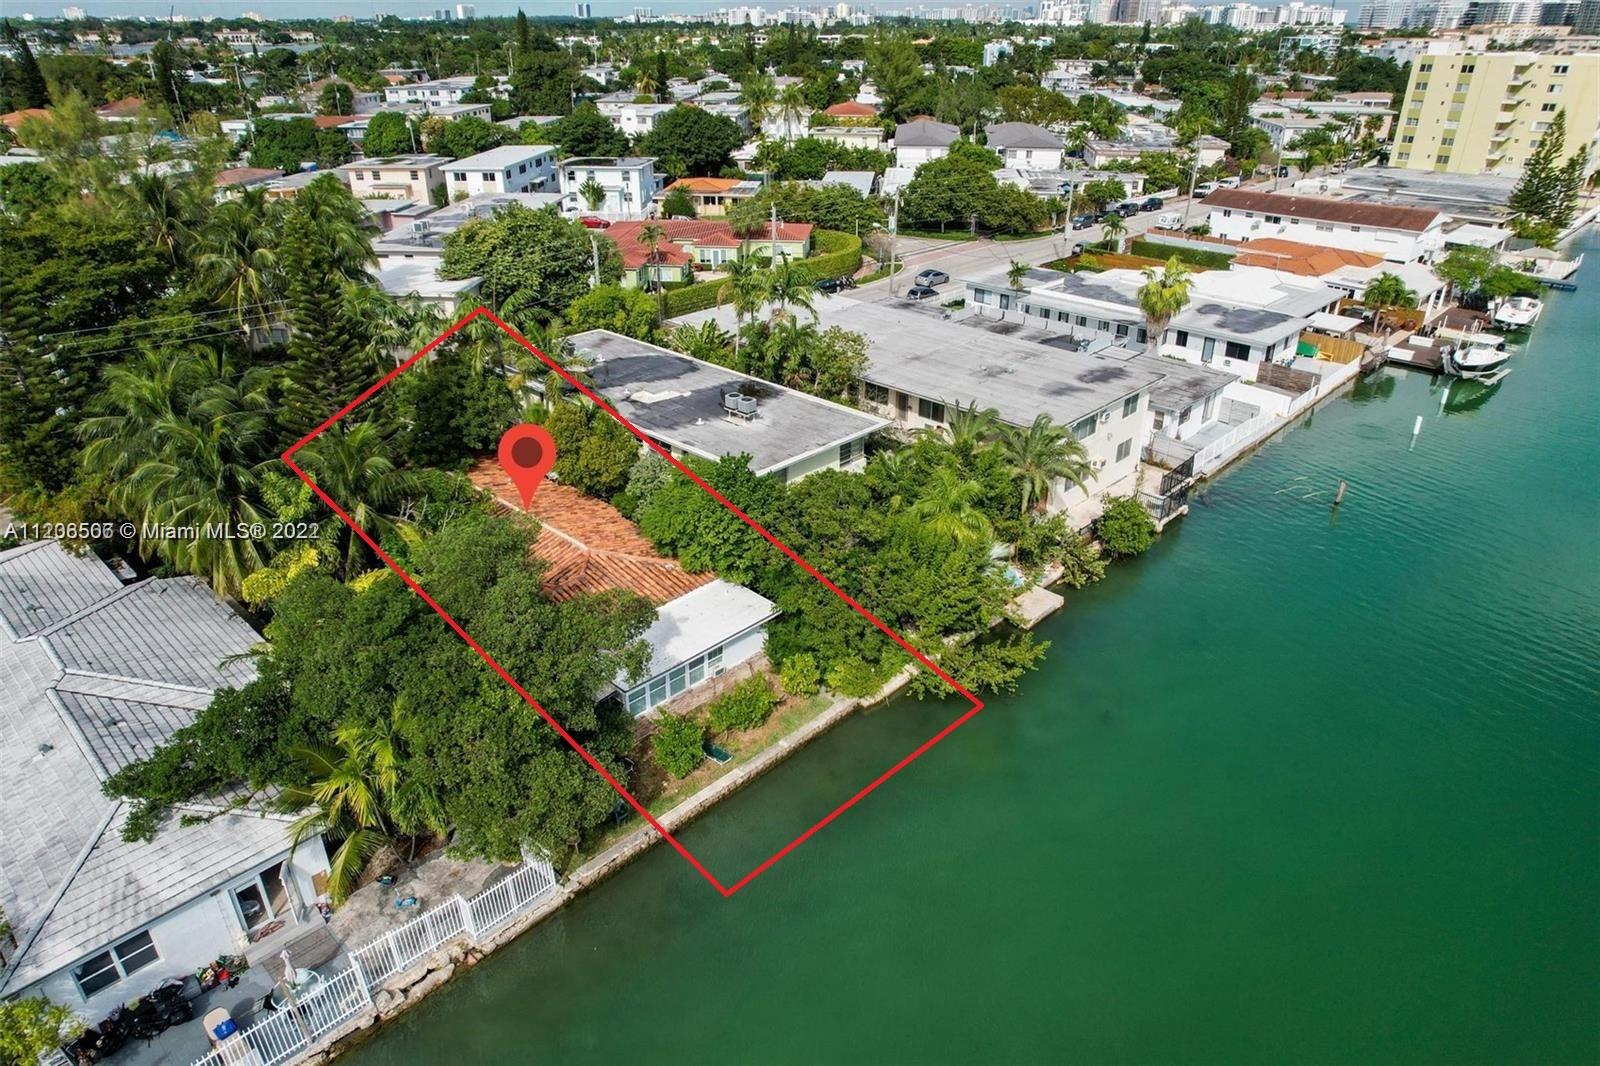 Amazing opportunity to own a waterfront duplex plus a studio in non-gated Biscayne Point. The lot is 5,750 Sqft with the option to buy the fourplex next to it located at 7885 Crespi and combine the two lots for total of 11,500 Sqft. You may renovate and increase the rents; or rebuild to increase the amount of units up to 15 combining 7885-7905 Crespi Blvd lots. The property consists of three units of 2 two bedrooms-two bathrooms and a studio in the back. Monthly income of $4,095 with potential to increse to $6,400. All the leases are month to month. This property already passed the 40 year inspection in 2019.